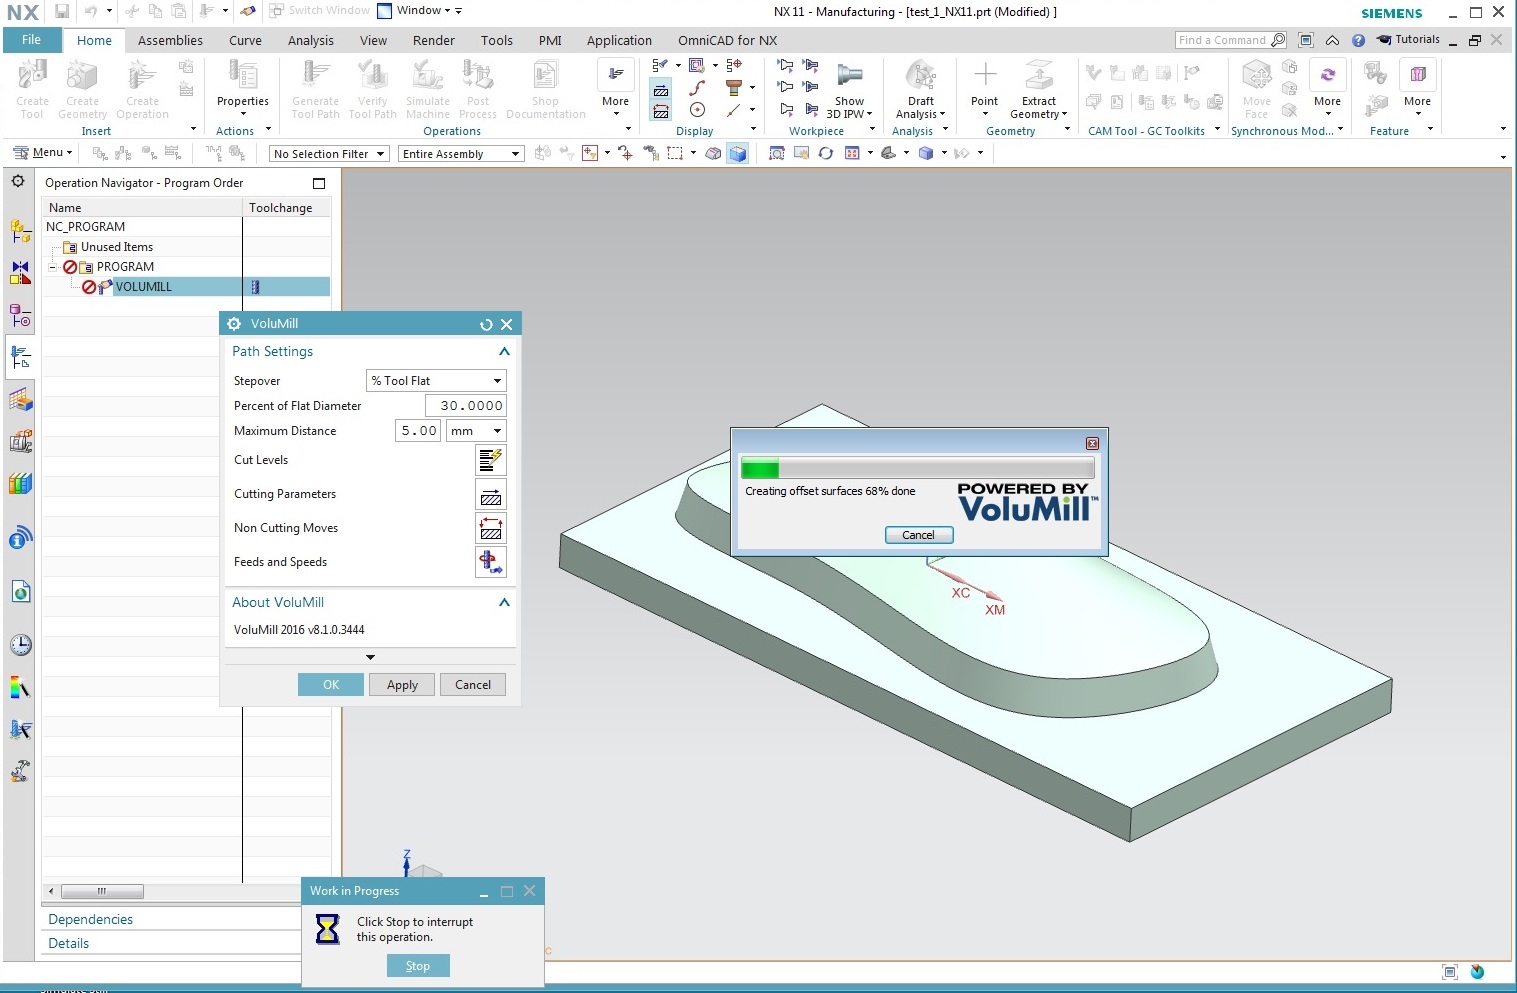 Working with VoluMill v8.1.0.3444 for NX-11.0 full license